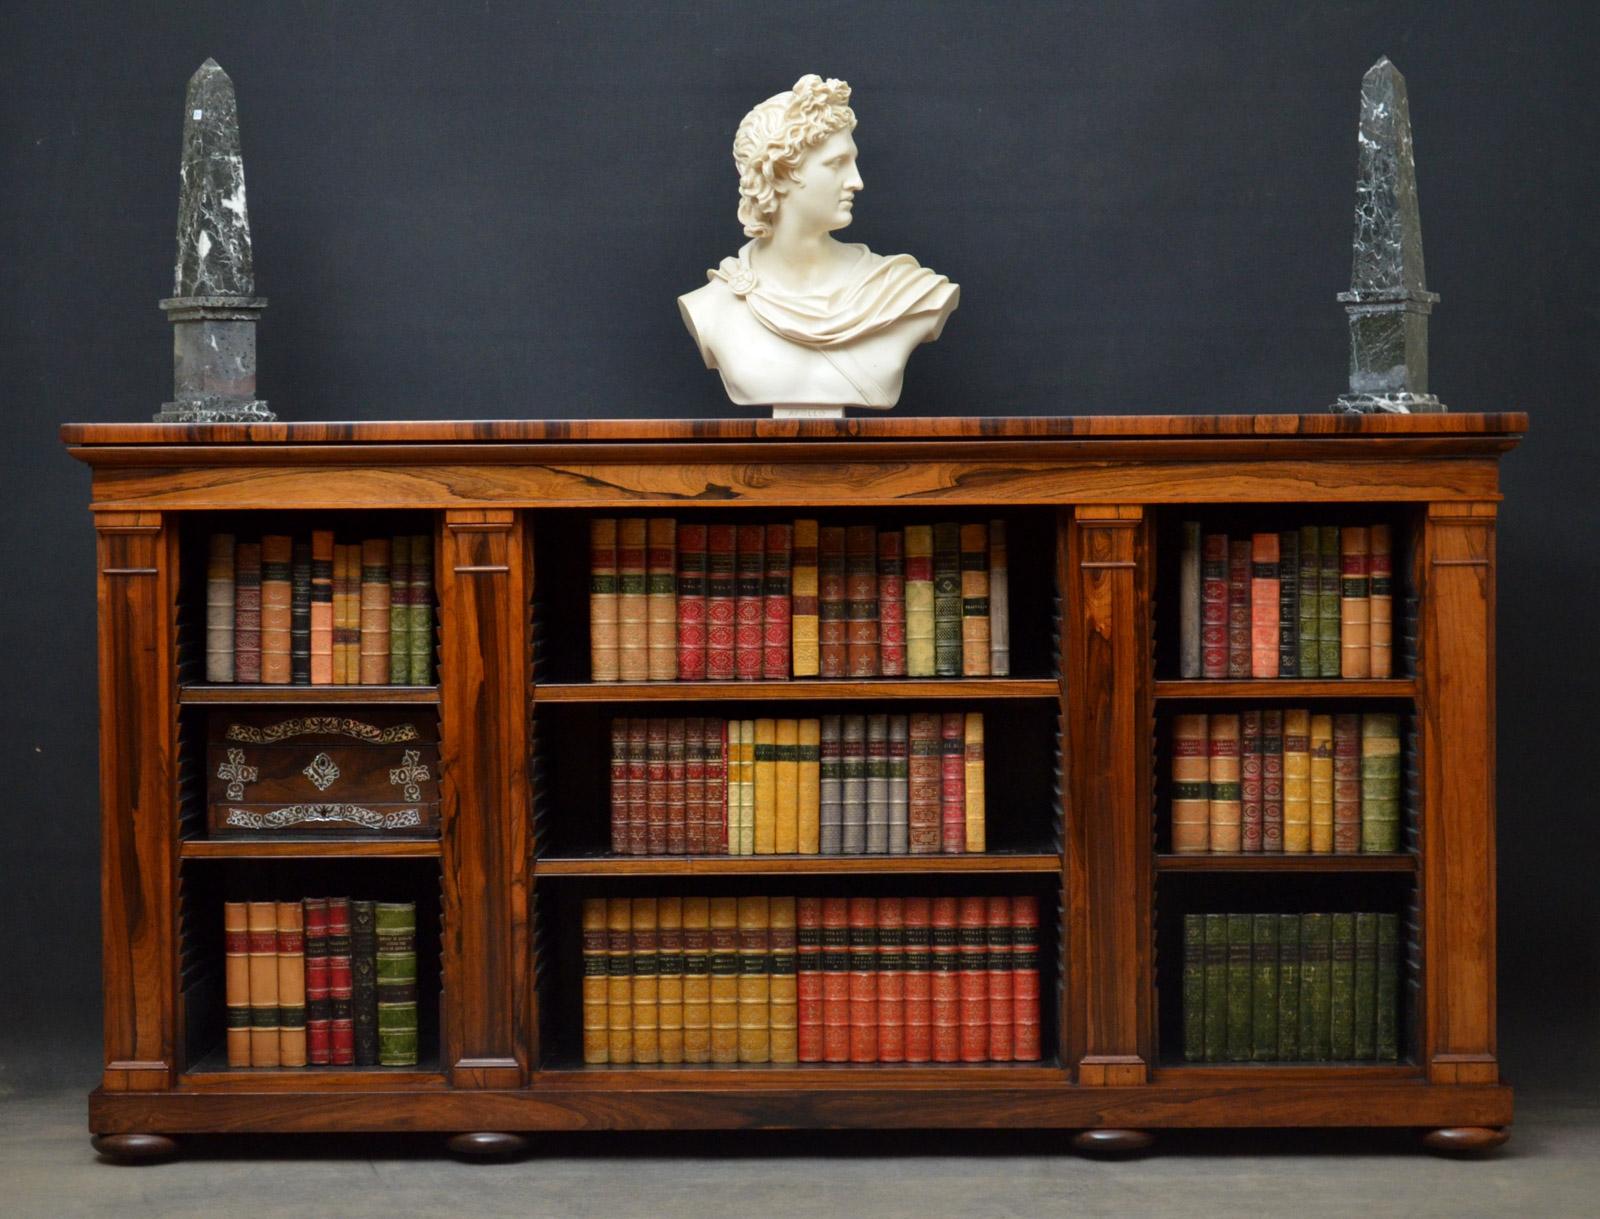 Sn4382, superior quality William IV low bookcase in rosewood, having stunning top above a three open sections with height adjustable shelves, flanked by tapering pilasters, standing on plinth base, bun feet and castors. This antique bookcase has